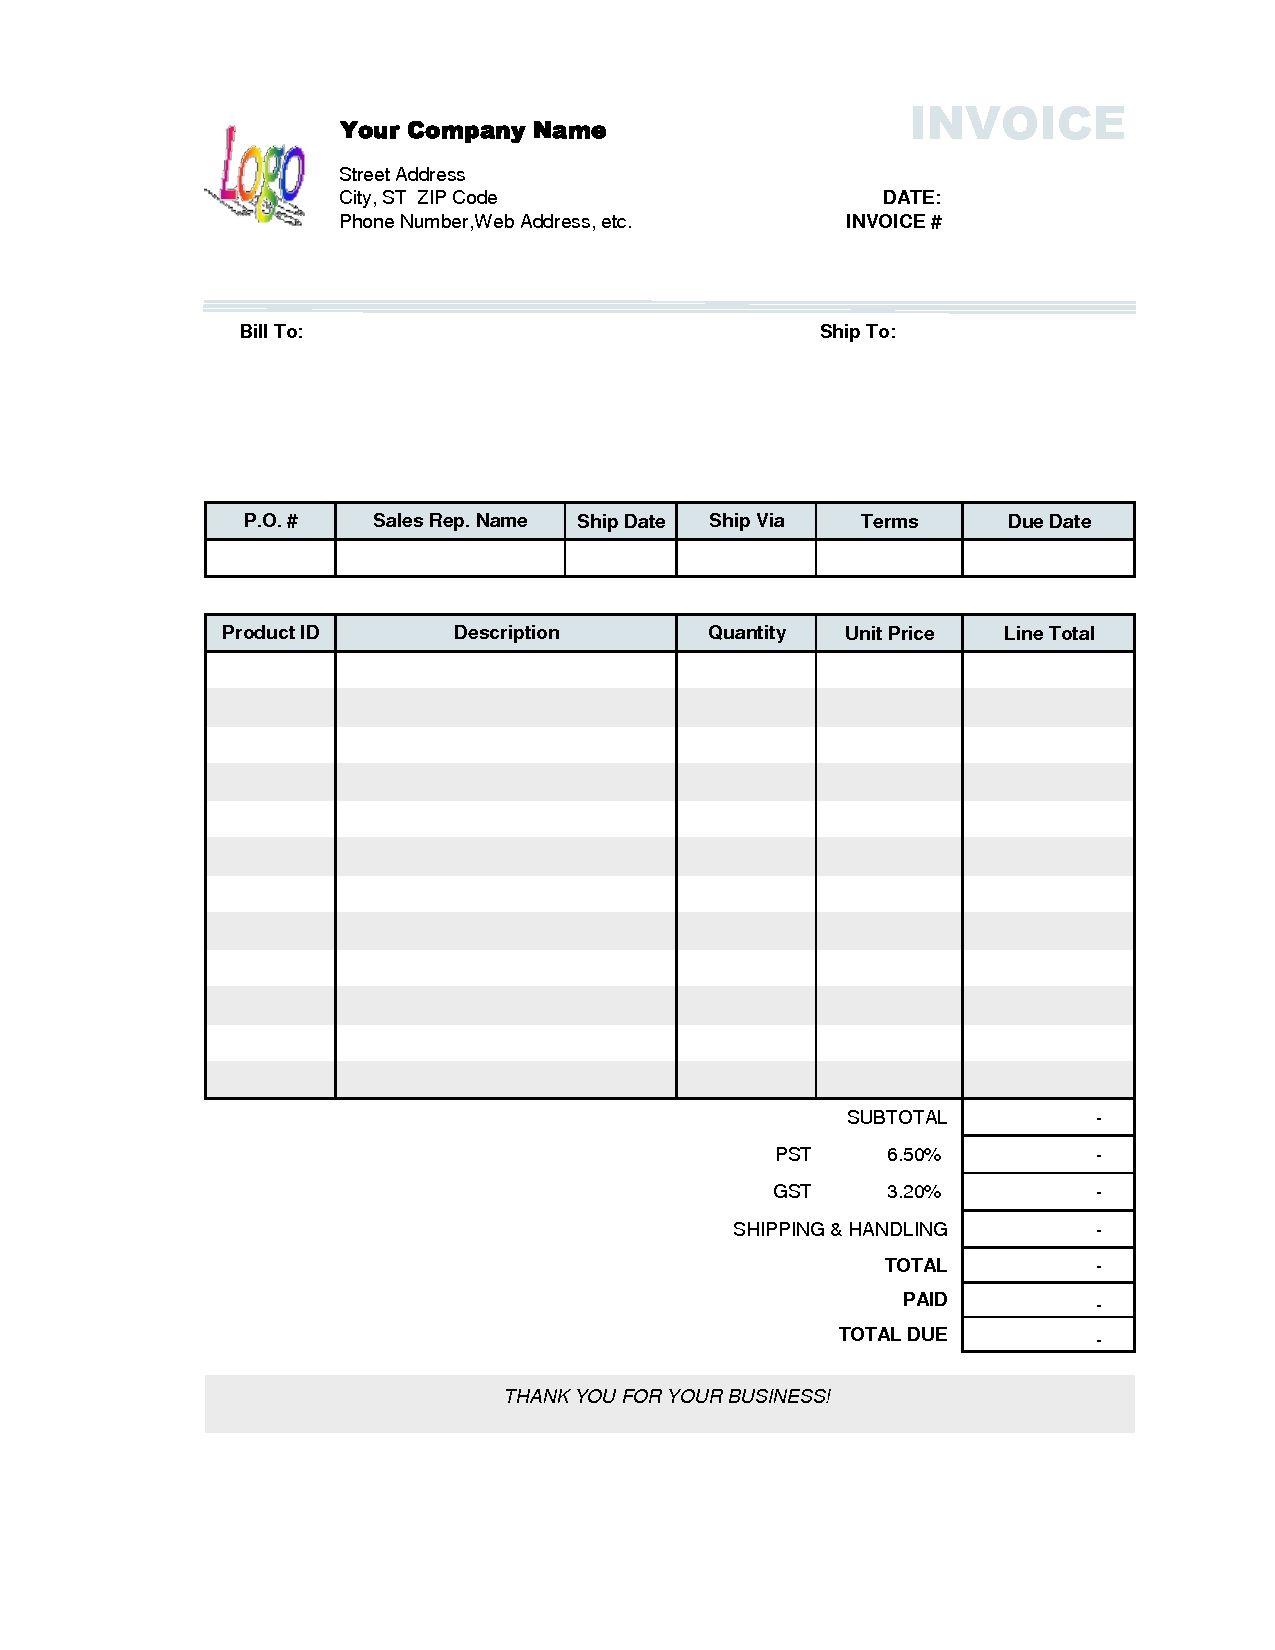 sample invoices for small business invoice template ideas free uk business invoice format